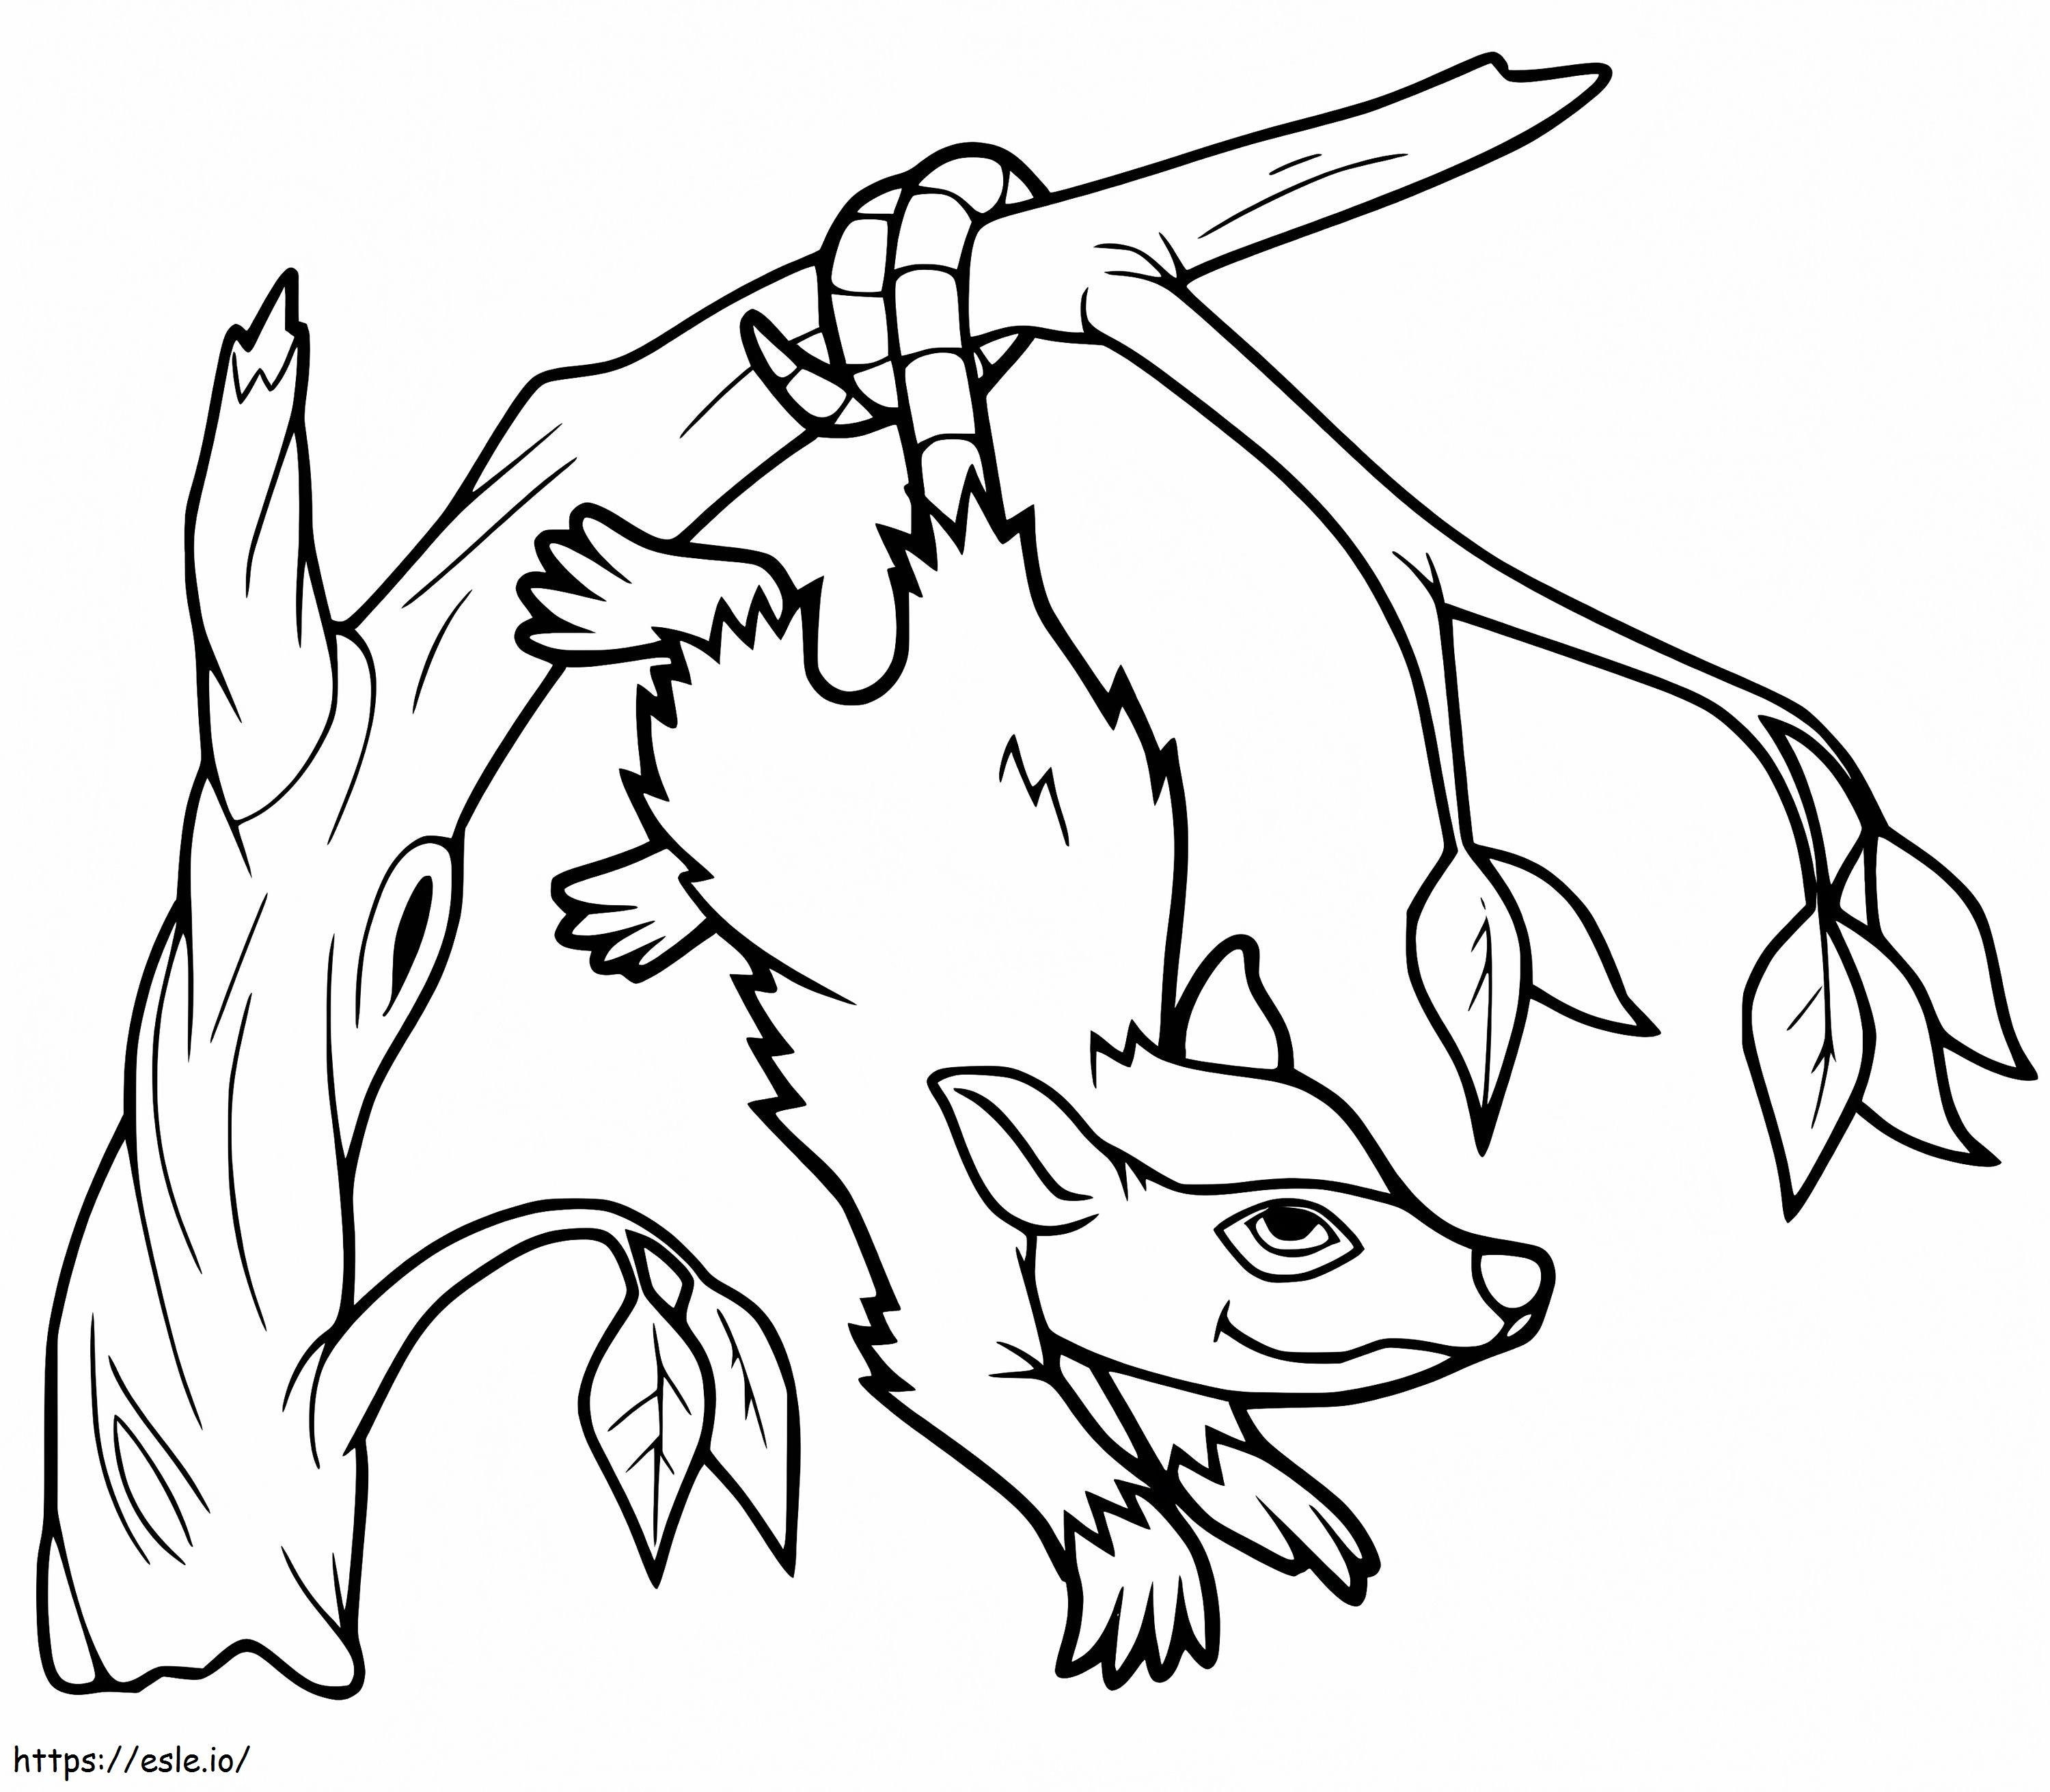 Opossum Smiling coloring page